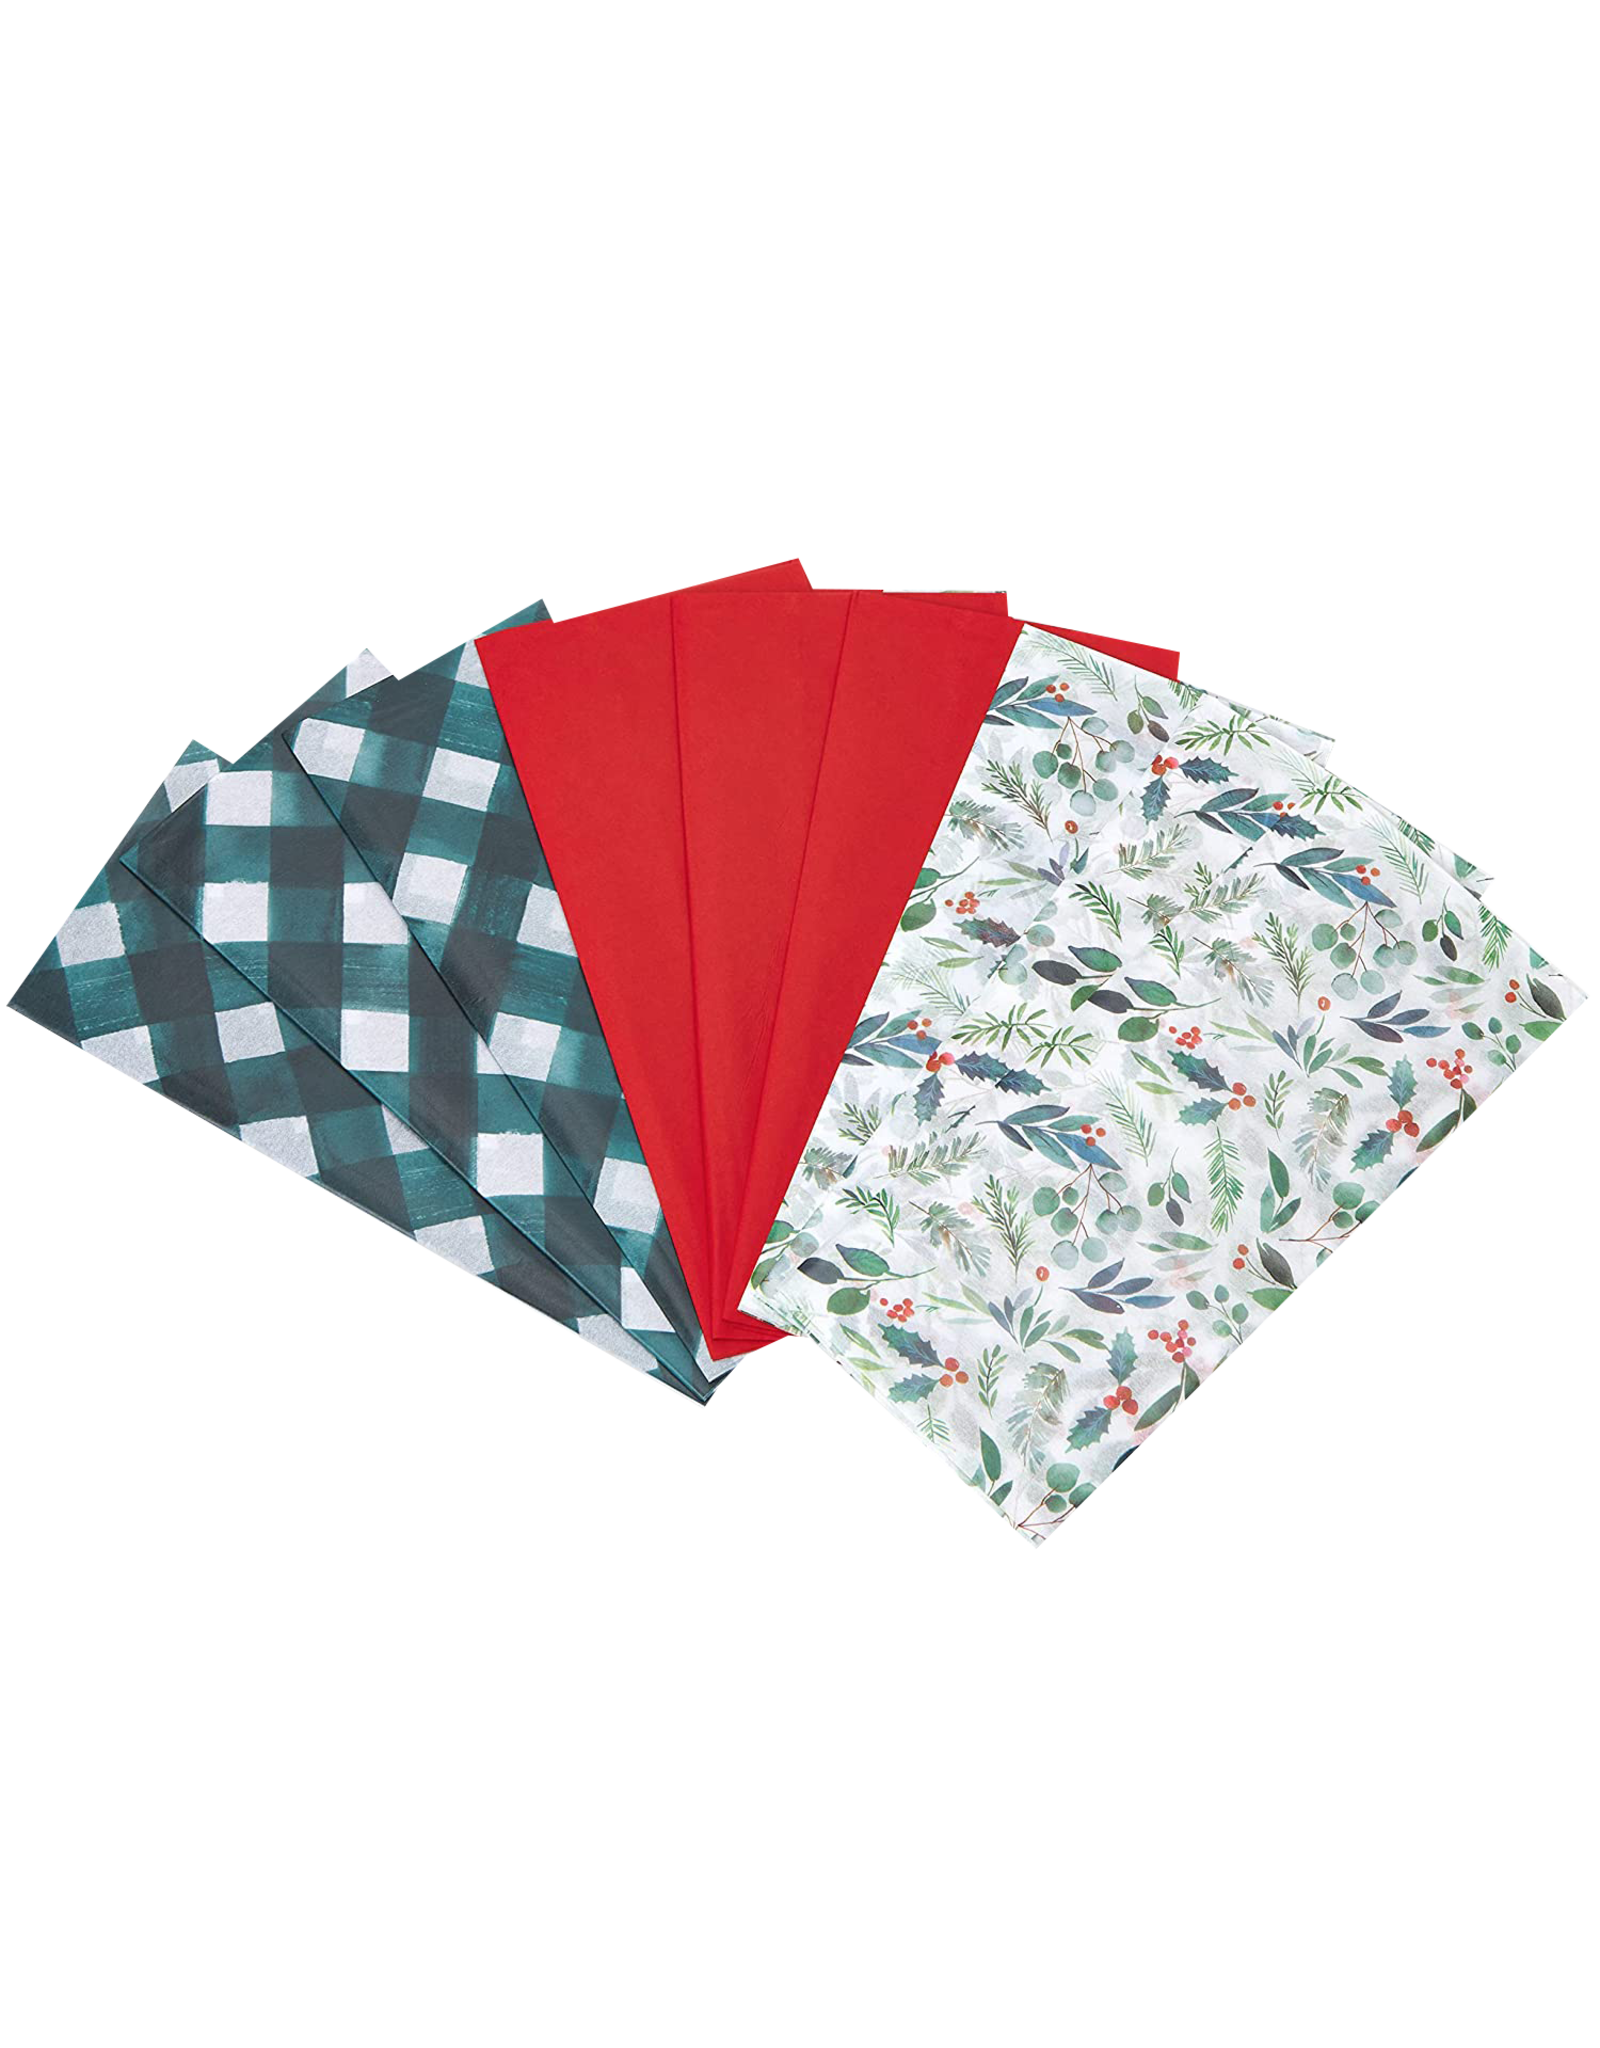 PAPYRUS® Christmas Tissue Paper 9 Sheets Joyful Traditions